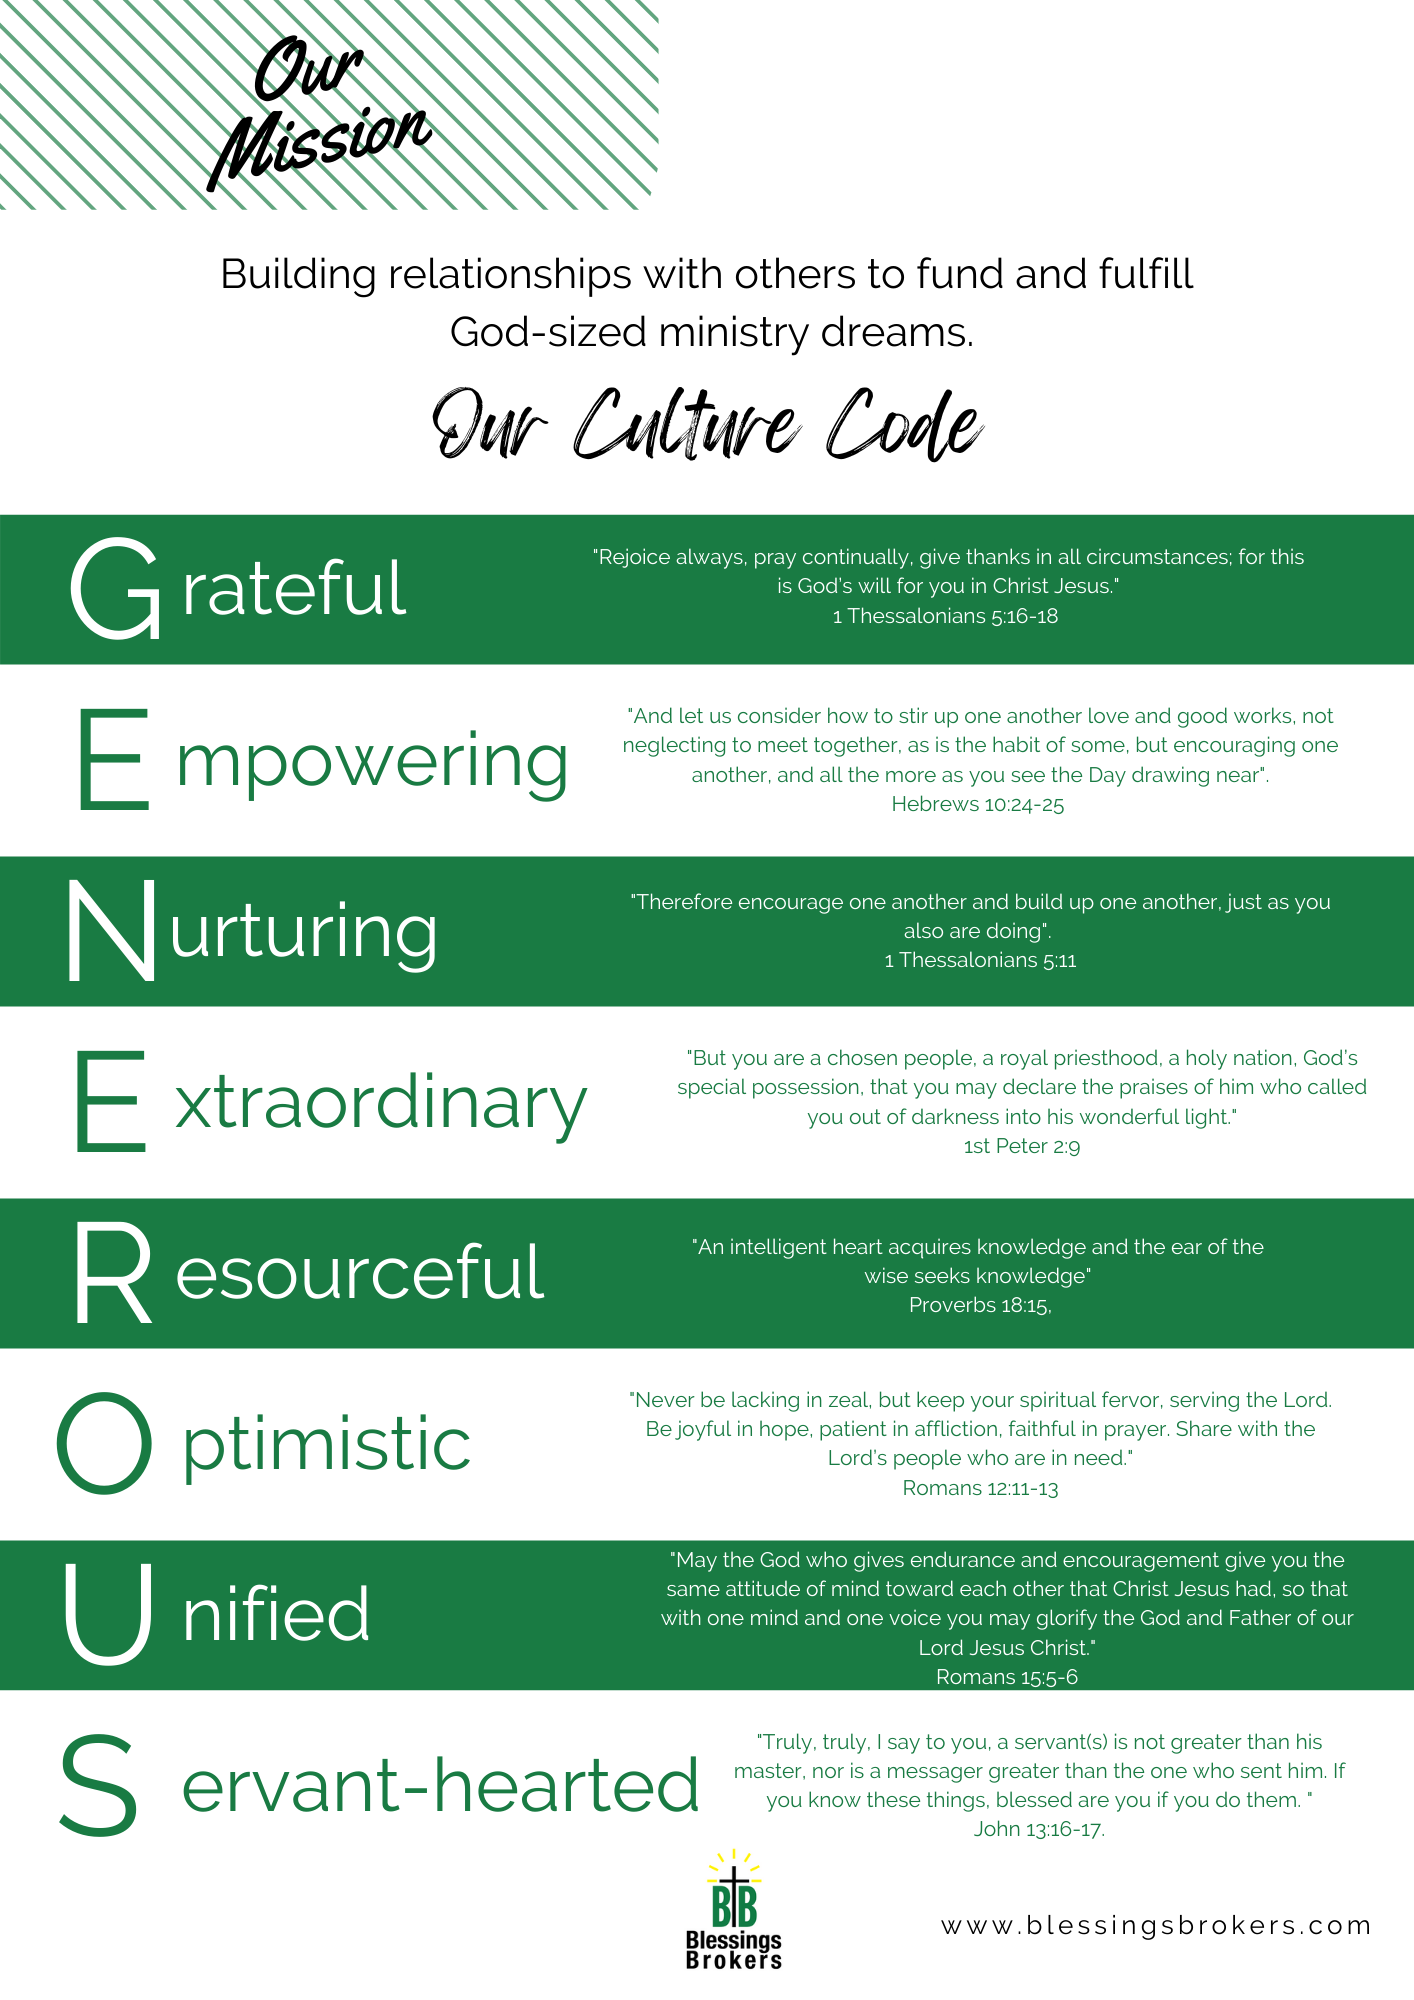 Our Culture Code